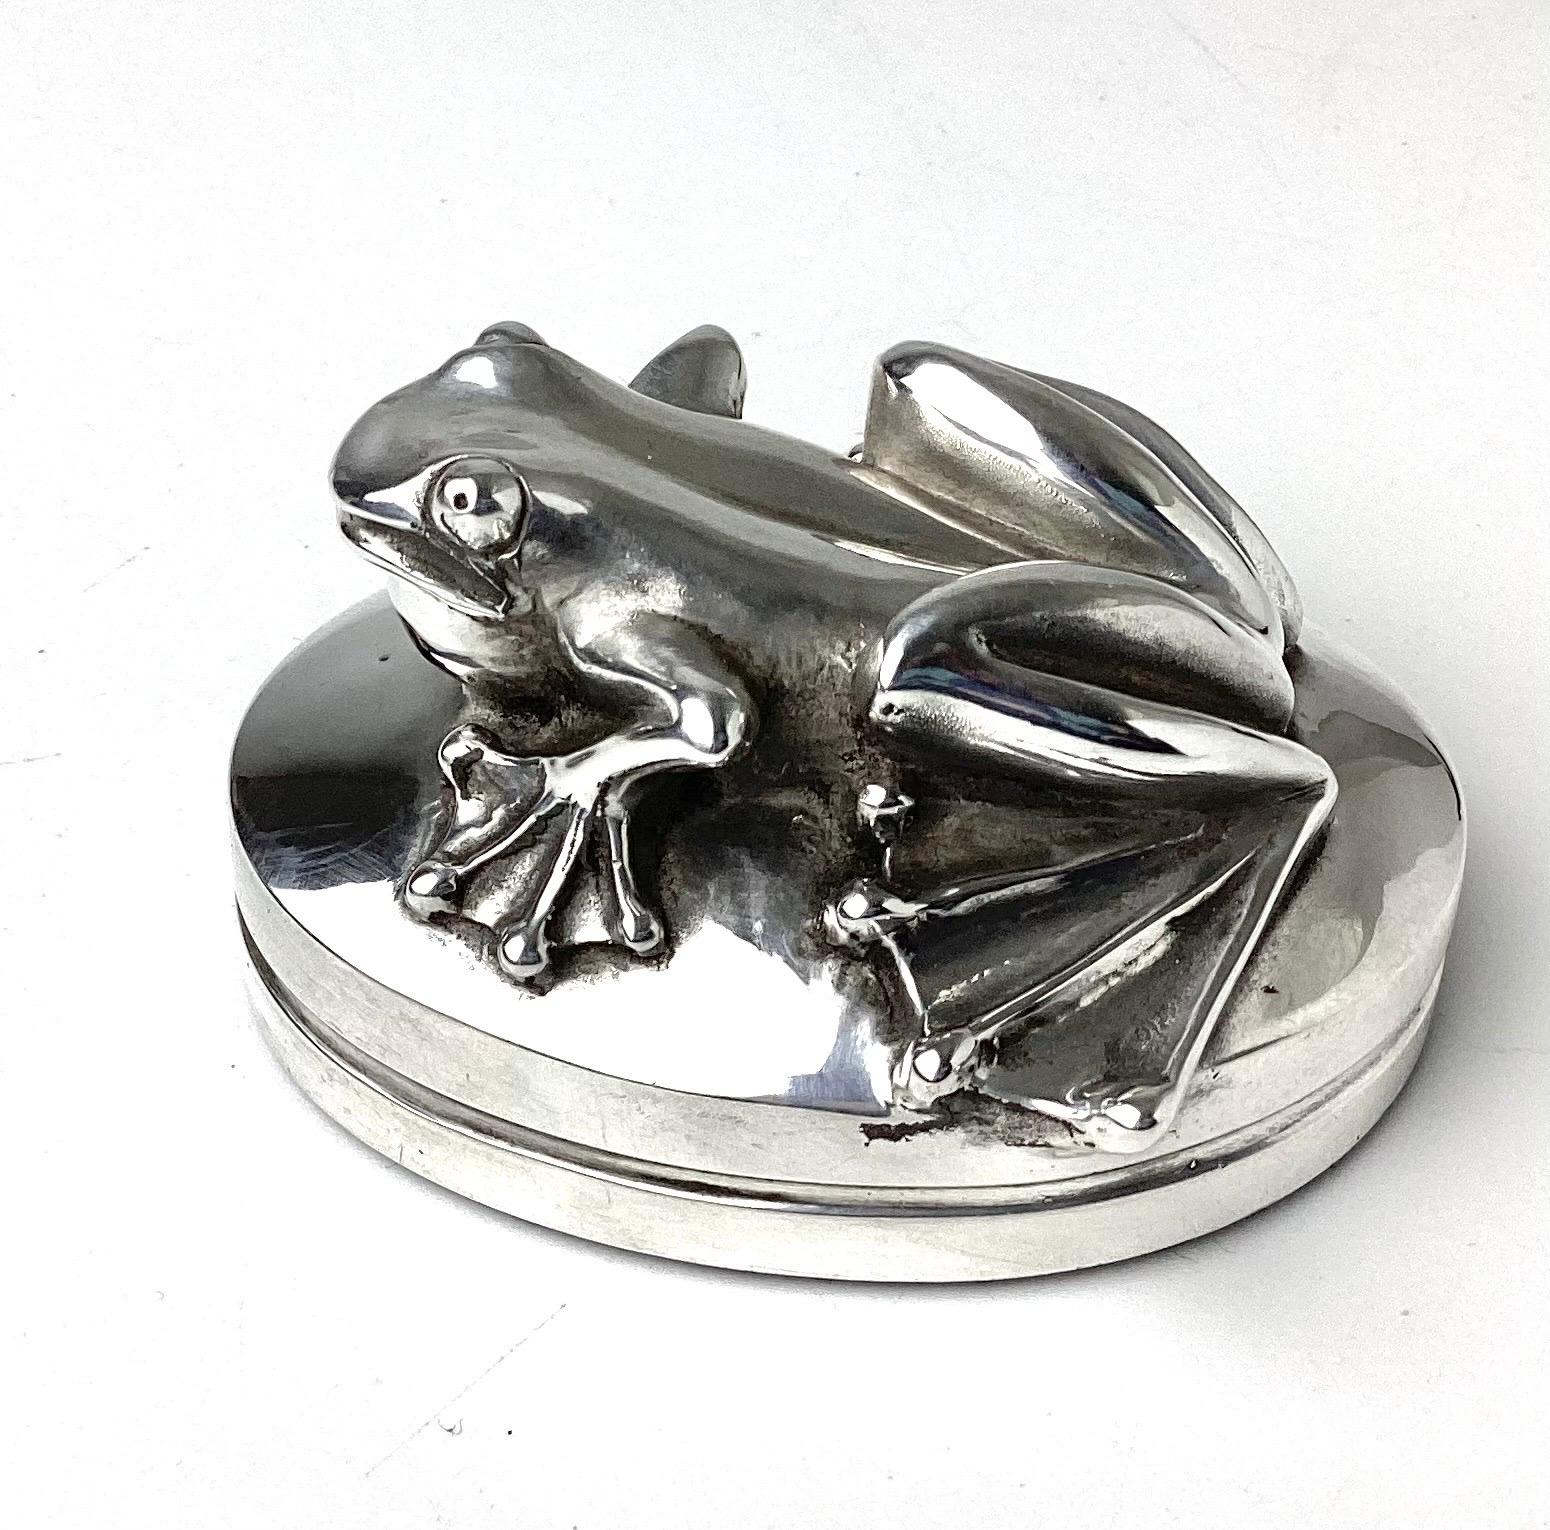 999 Pure Silver Repousse Frog / Toad Sculpture or Paperweight by Henryk Winograd 2